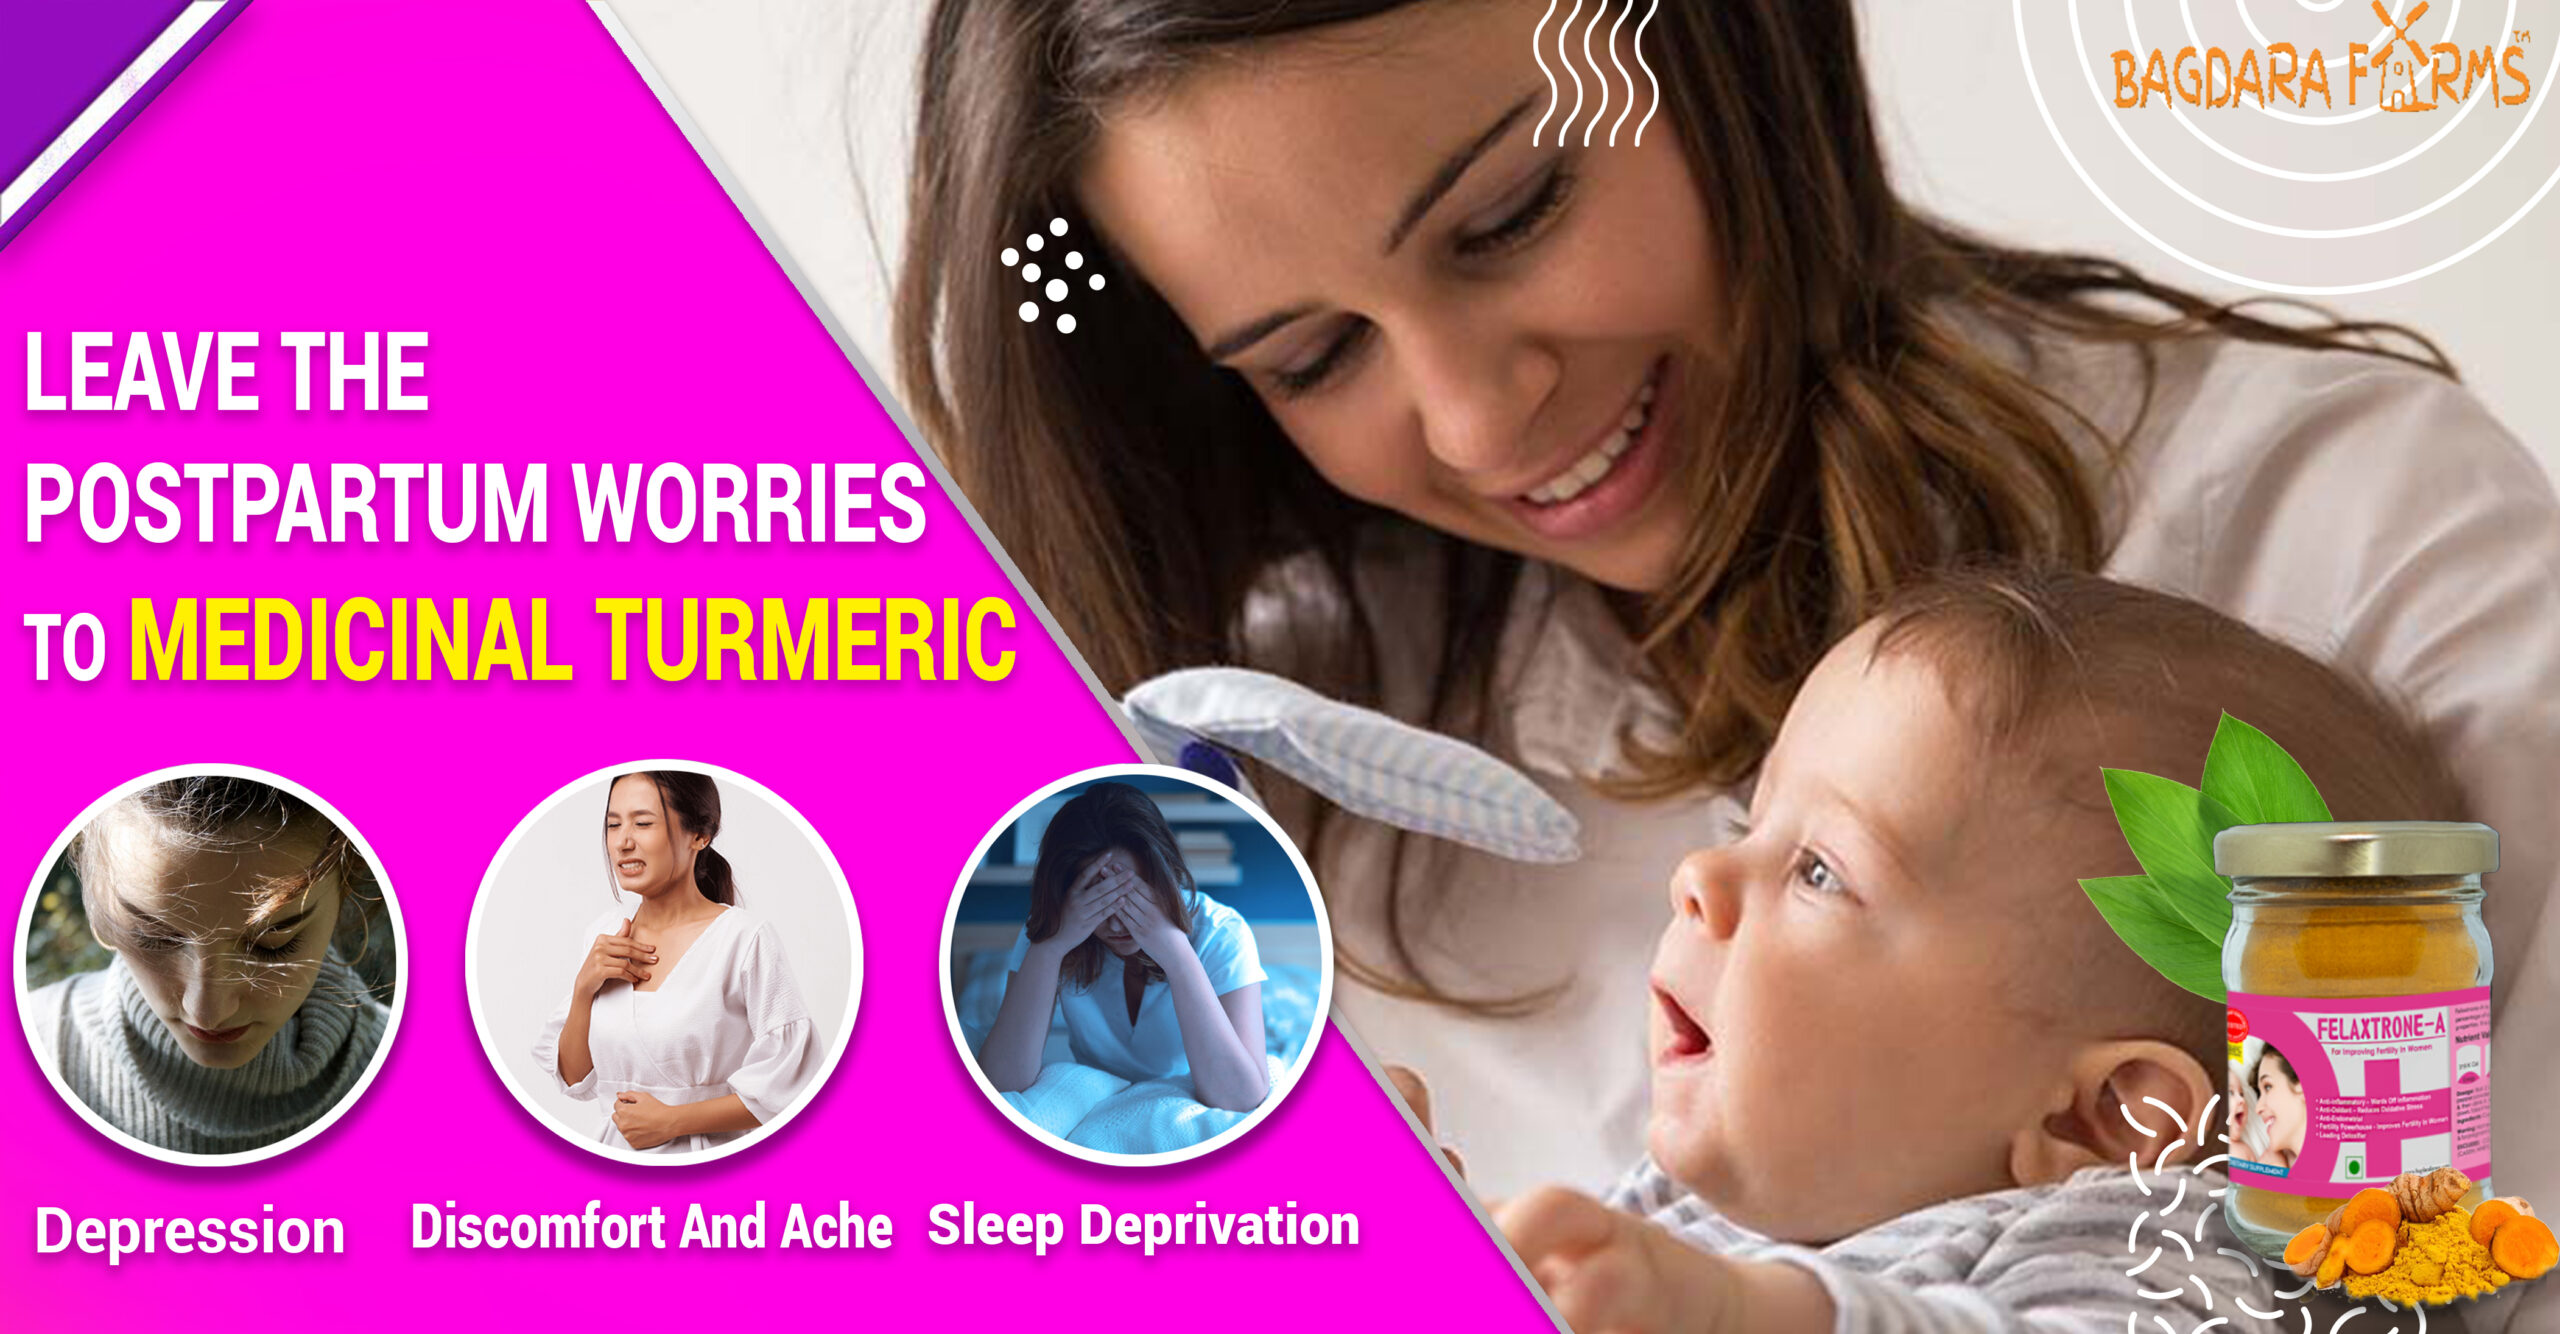 Leave the postpartum worries With Felextrone A